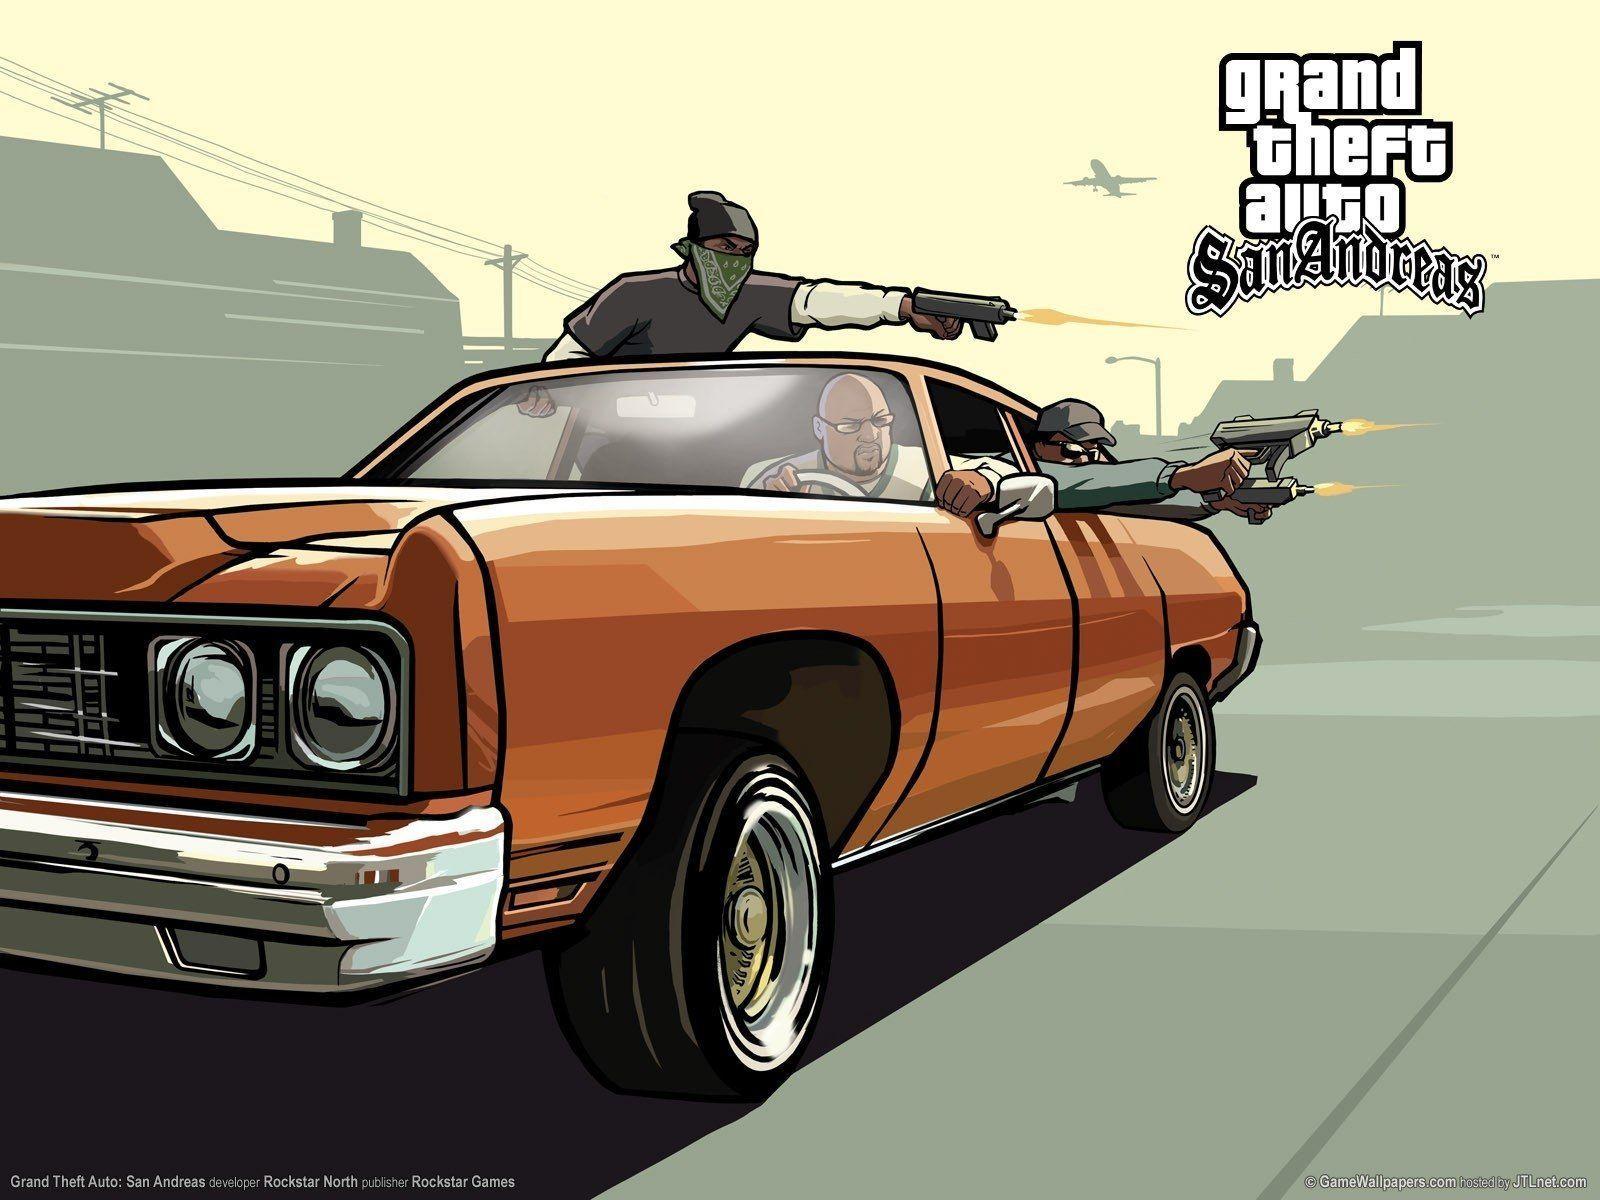 Grand Theft Auto: San Andreas HD Wallpaper and Background Image